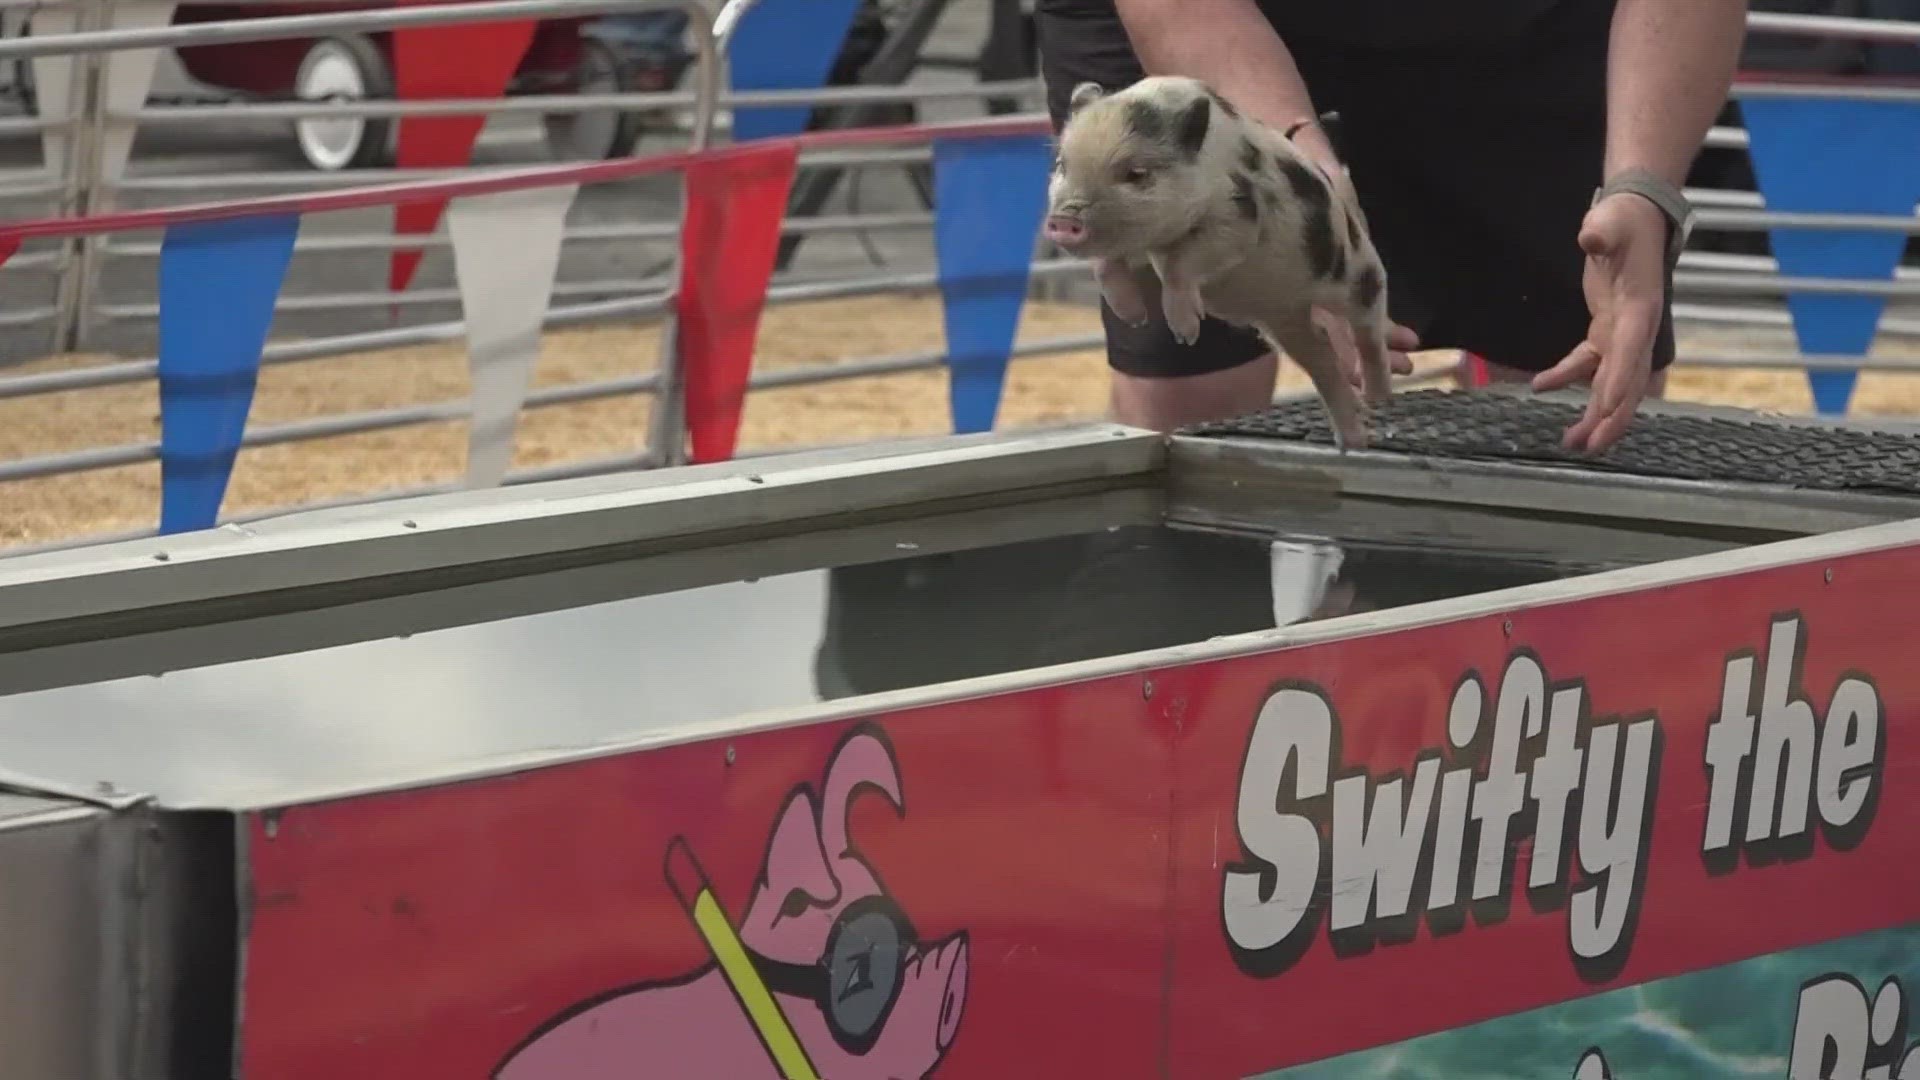 There are swine races, a petting zoo, a dairy barn, and so much more.